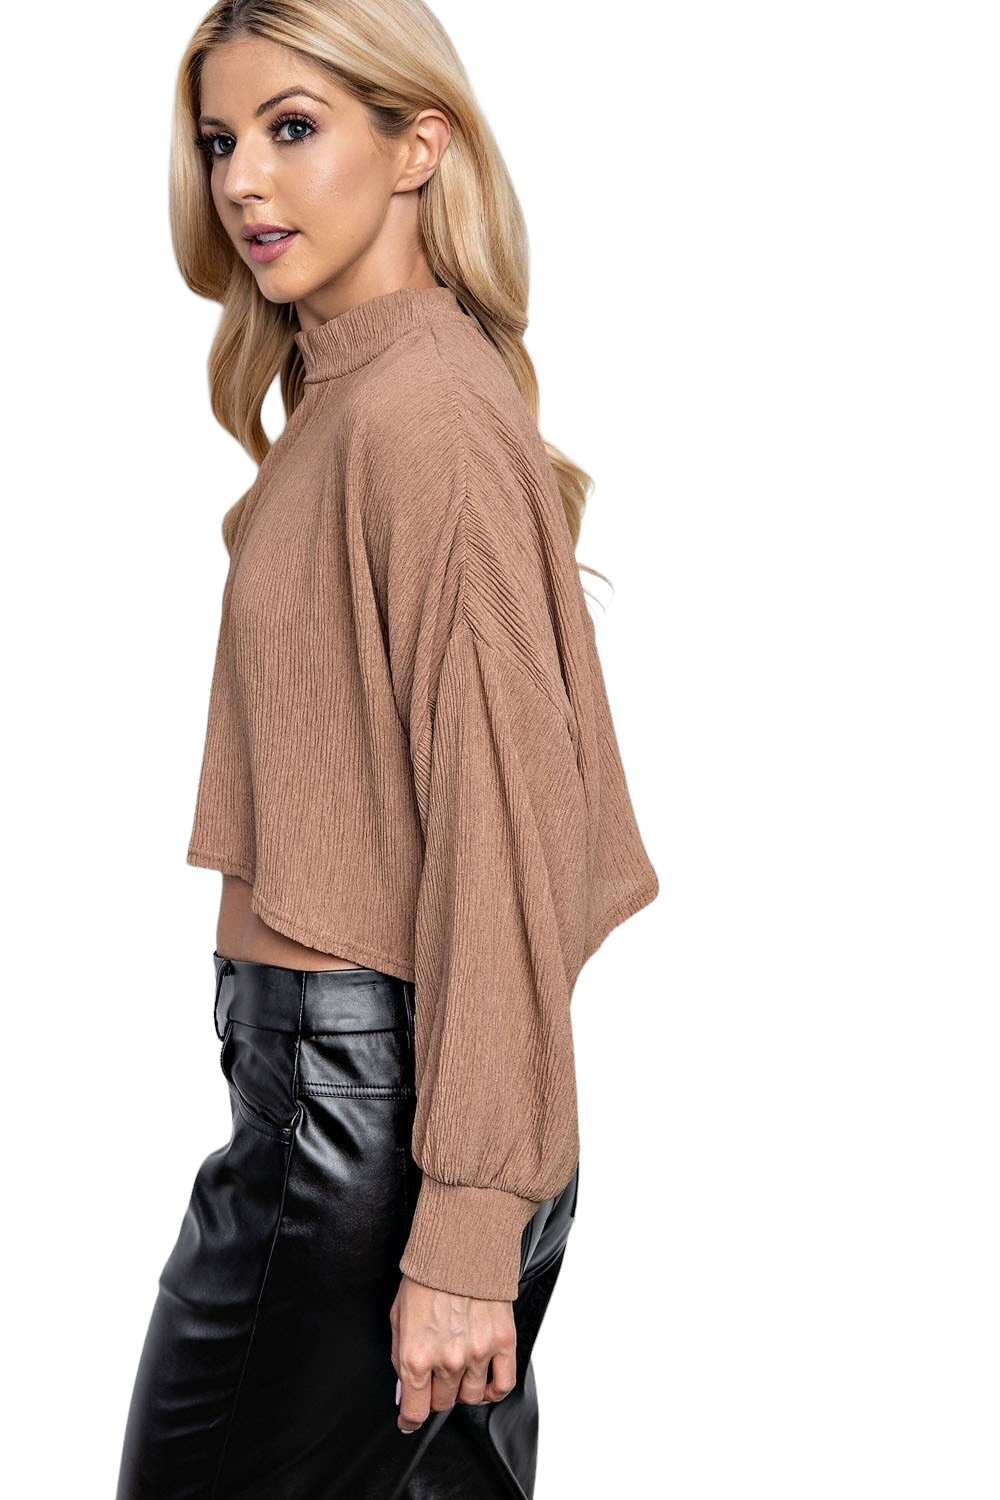 Loving Arms Top-TAUPE